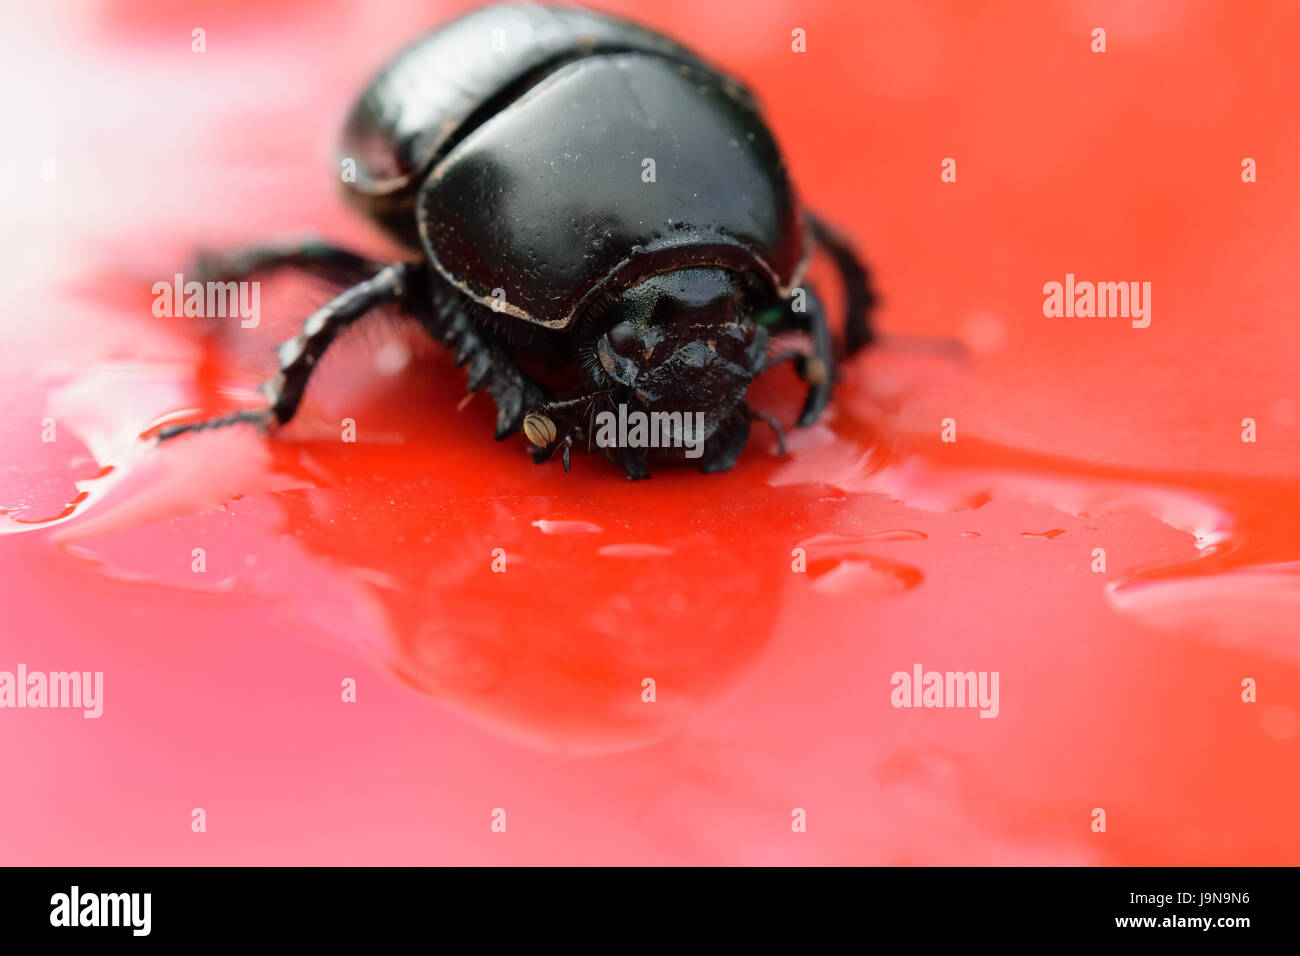 Close-up of the Dor Beetle / Dumbledore Dung Beetle Stock Photo